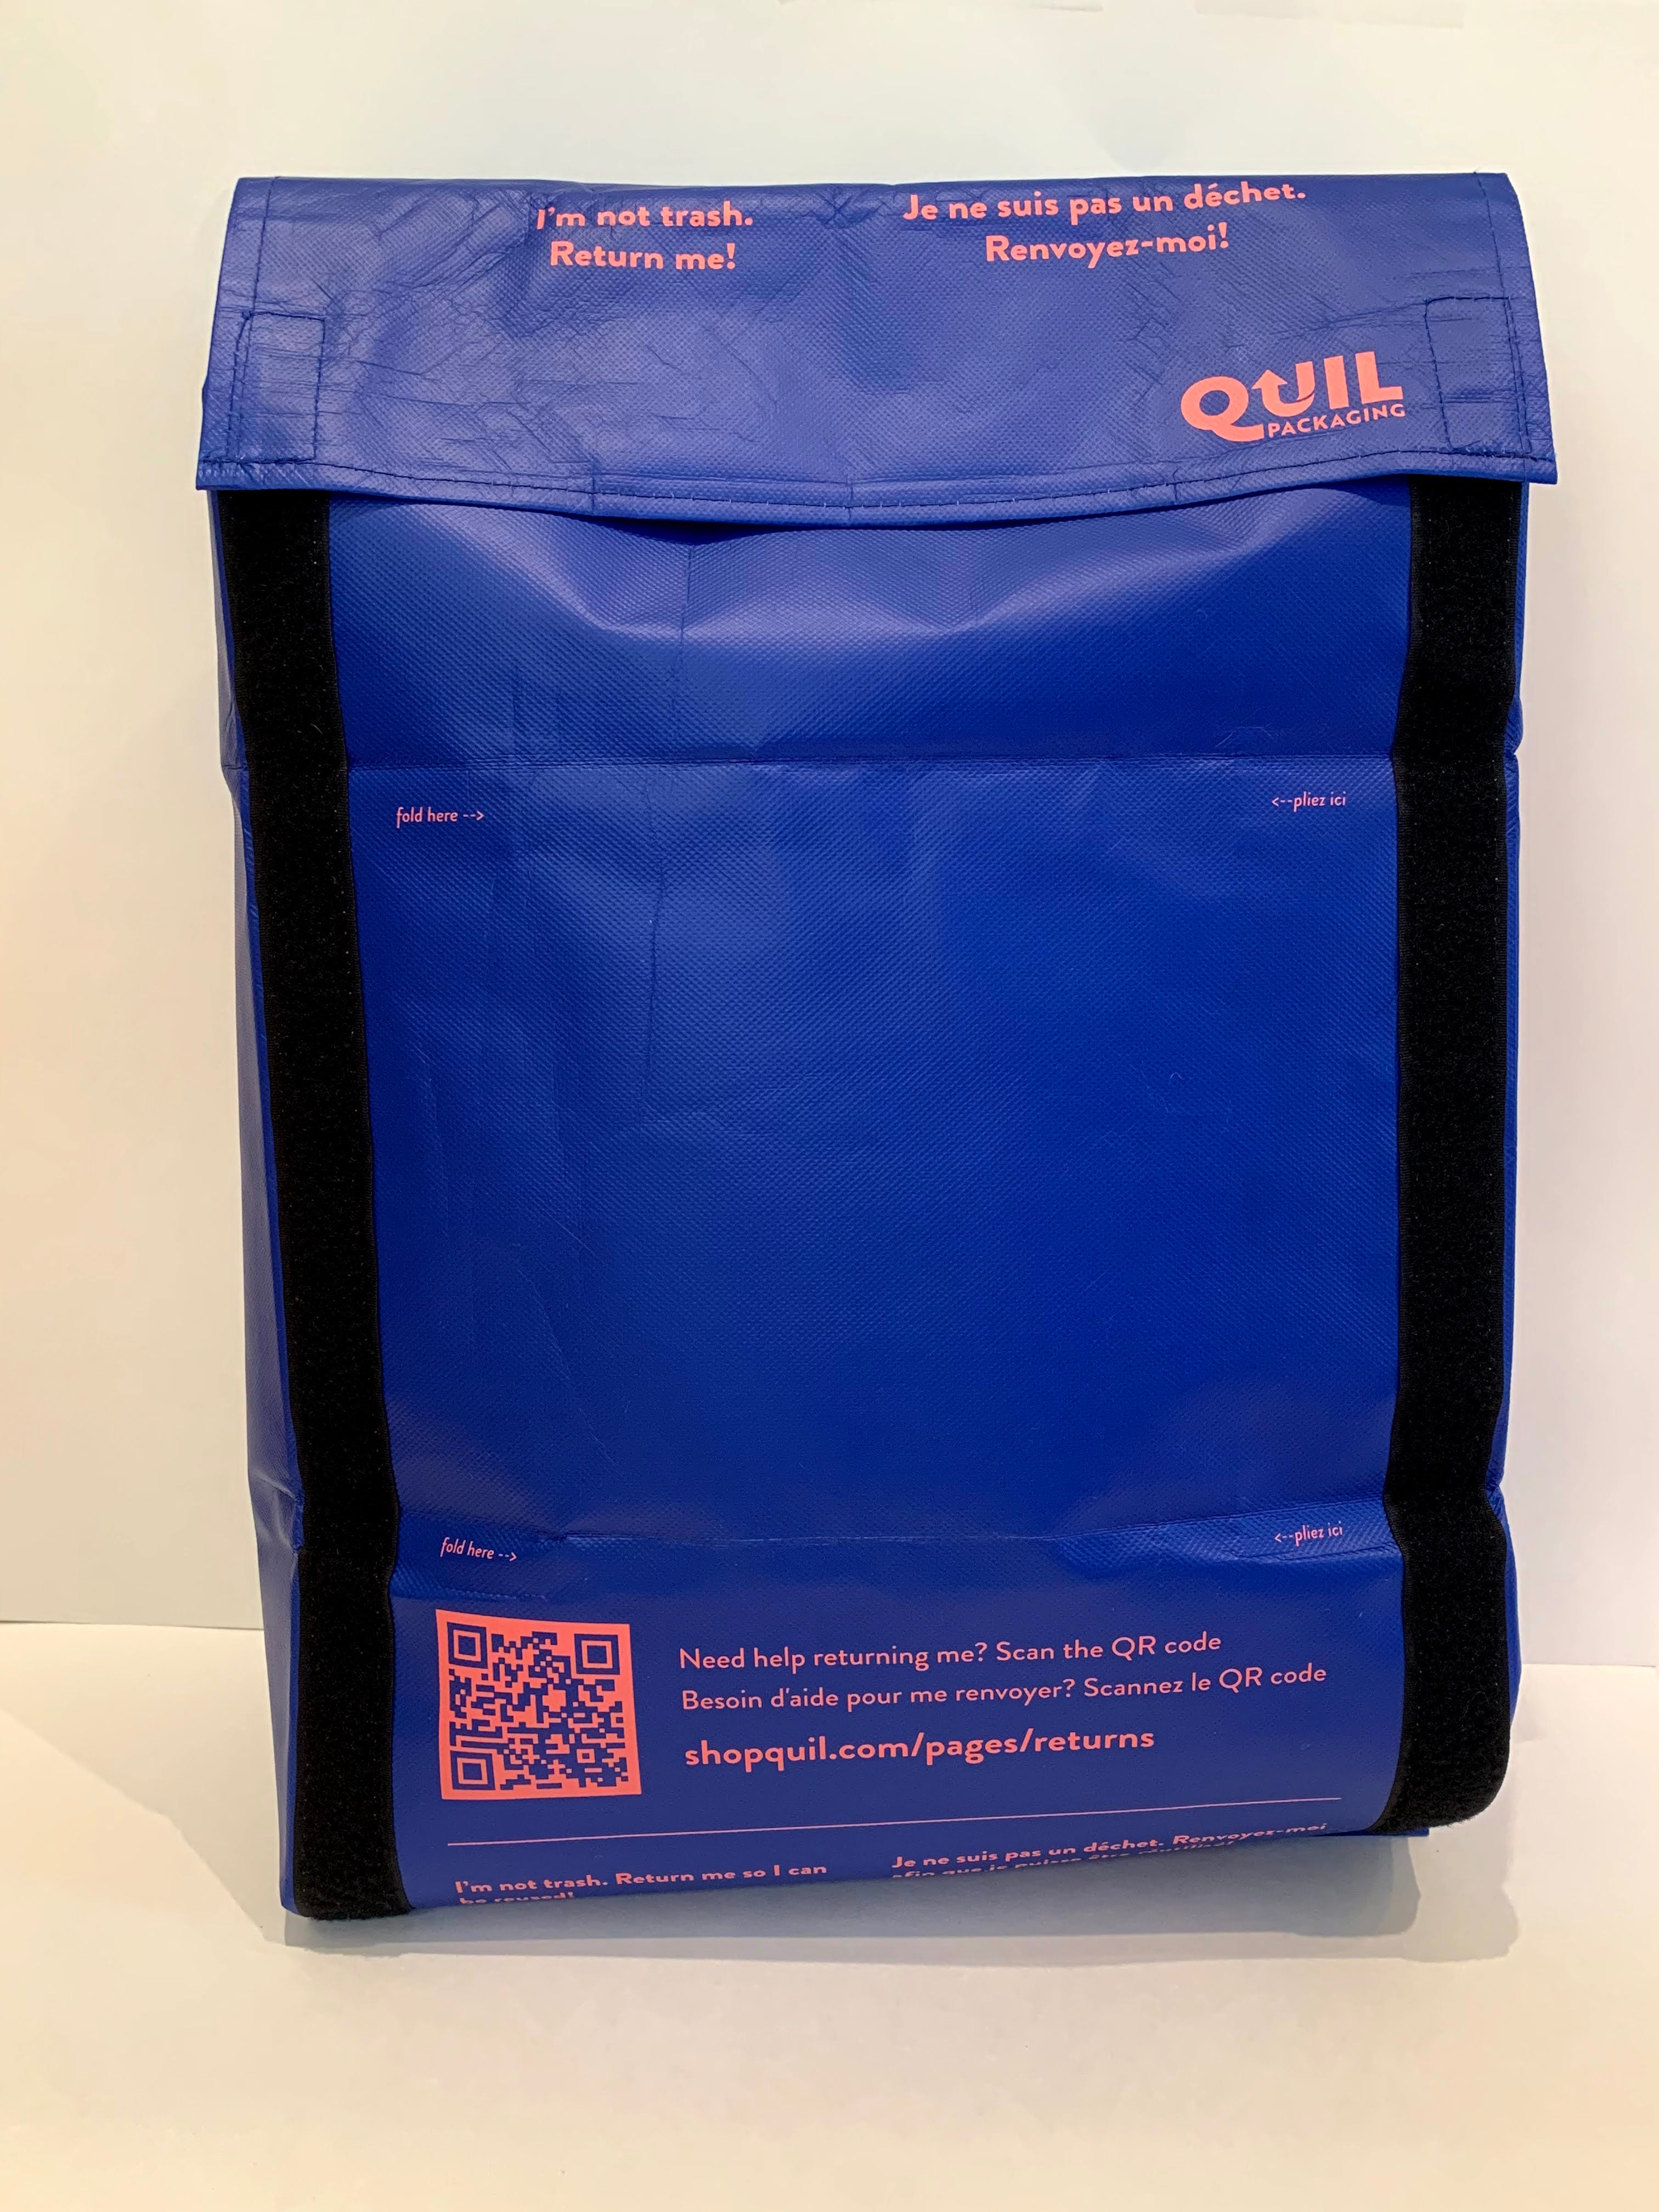 The medium reusable bag can be easily packed and secured with velcro. The bag also comes with clear instructions to return it for reuse.